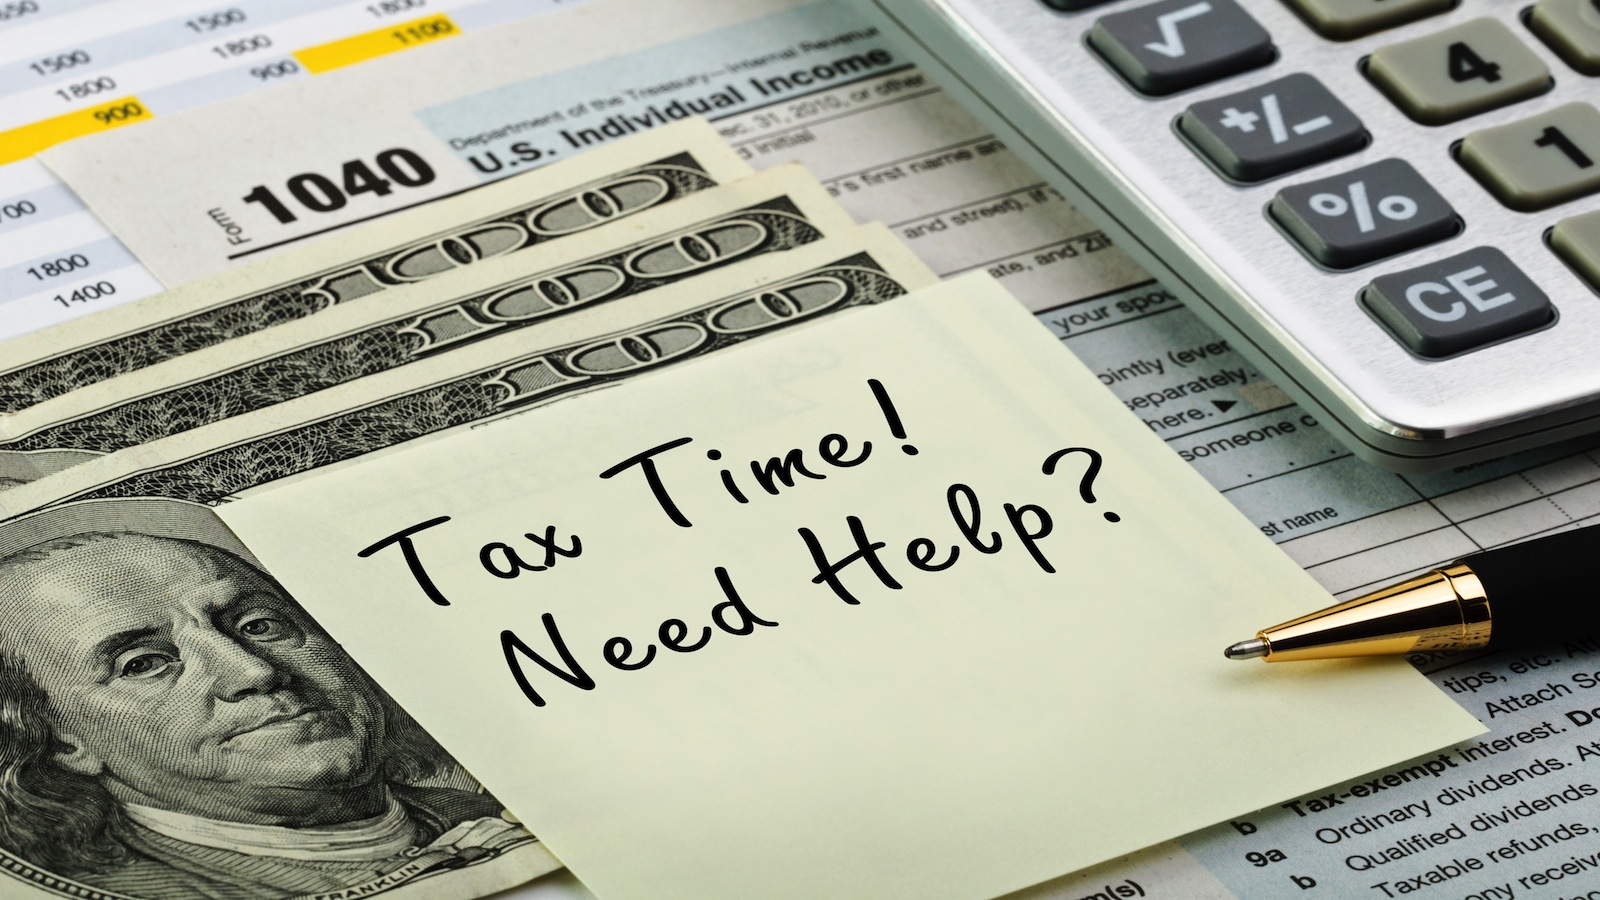 Oniks Tax Services Tax Preparation, Bookkeeping, Notary Public, Health & Life Insurance